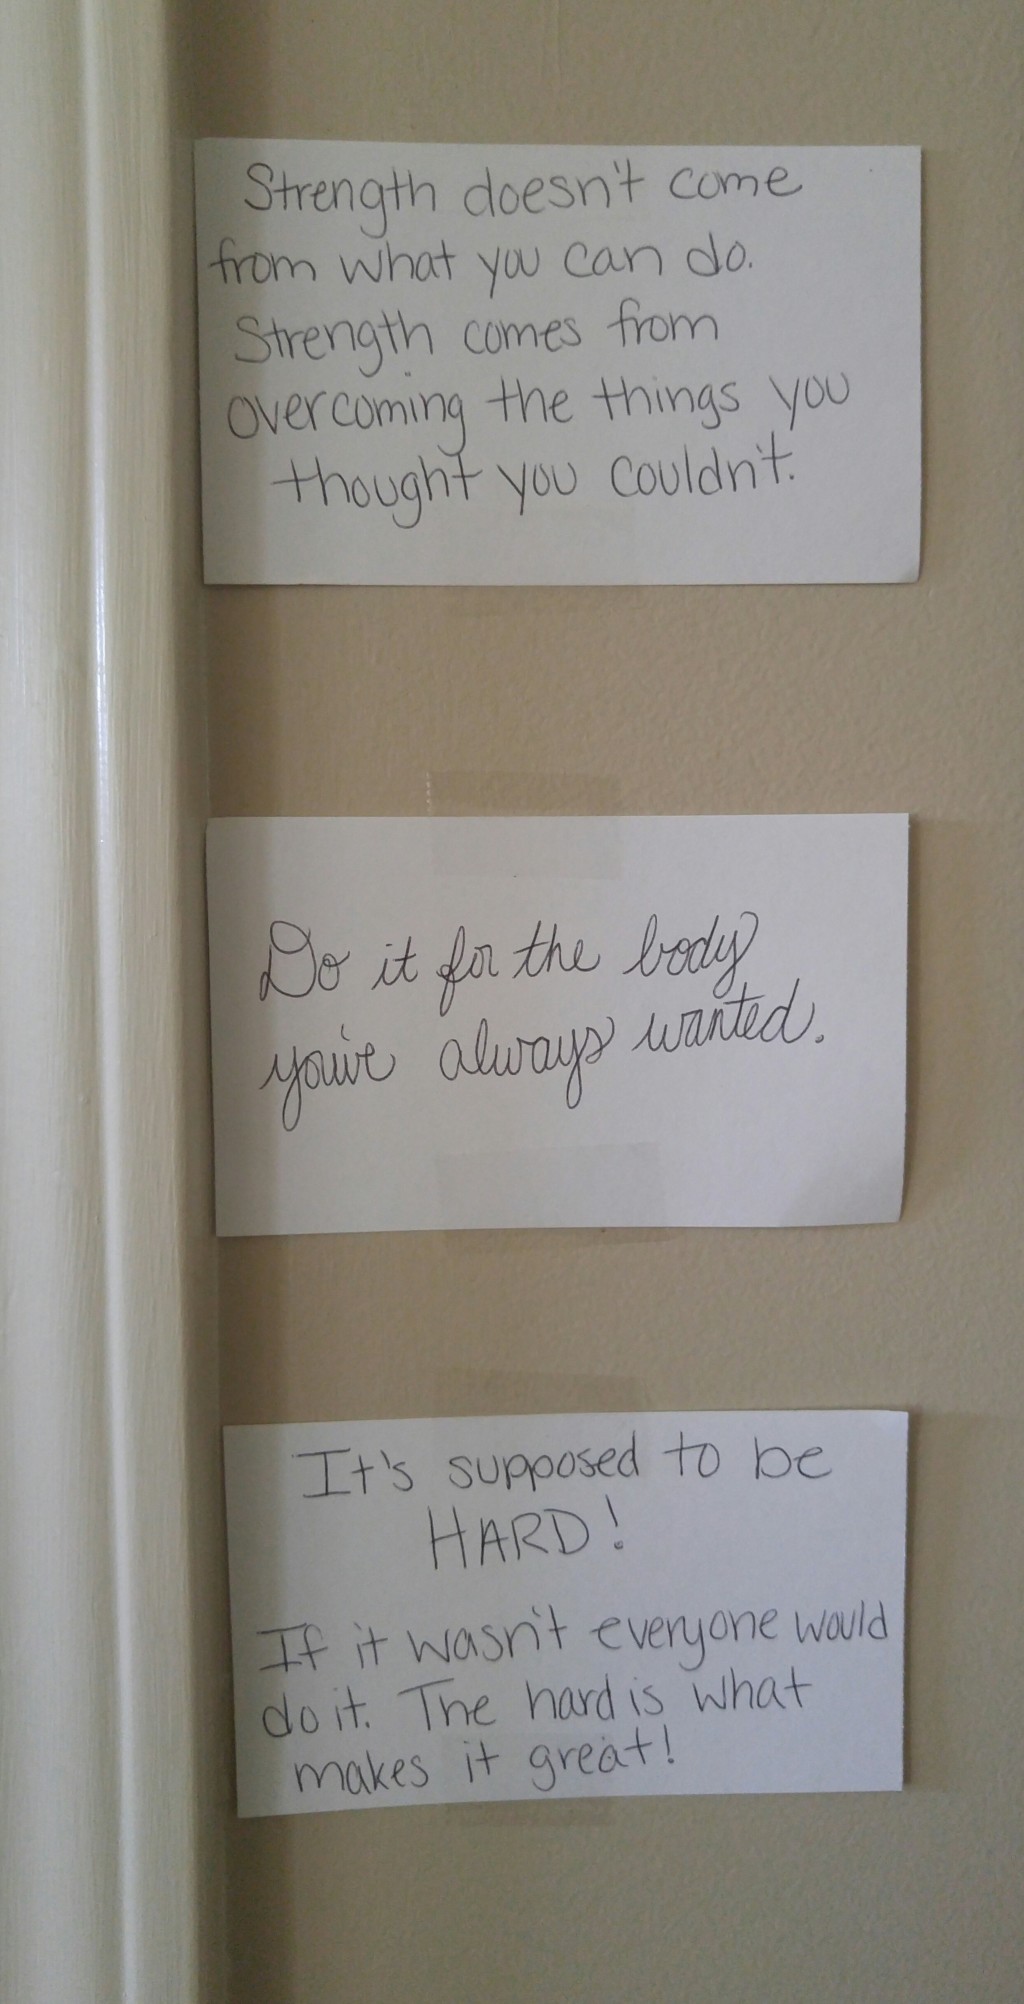 These note cards are posted on the wall in the room where I workout.